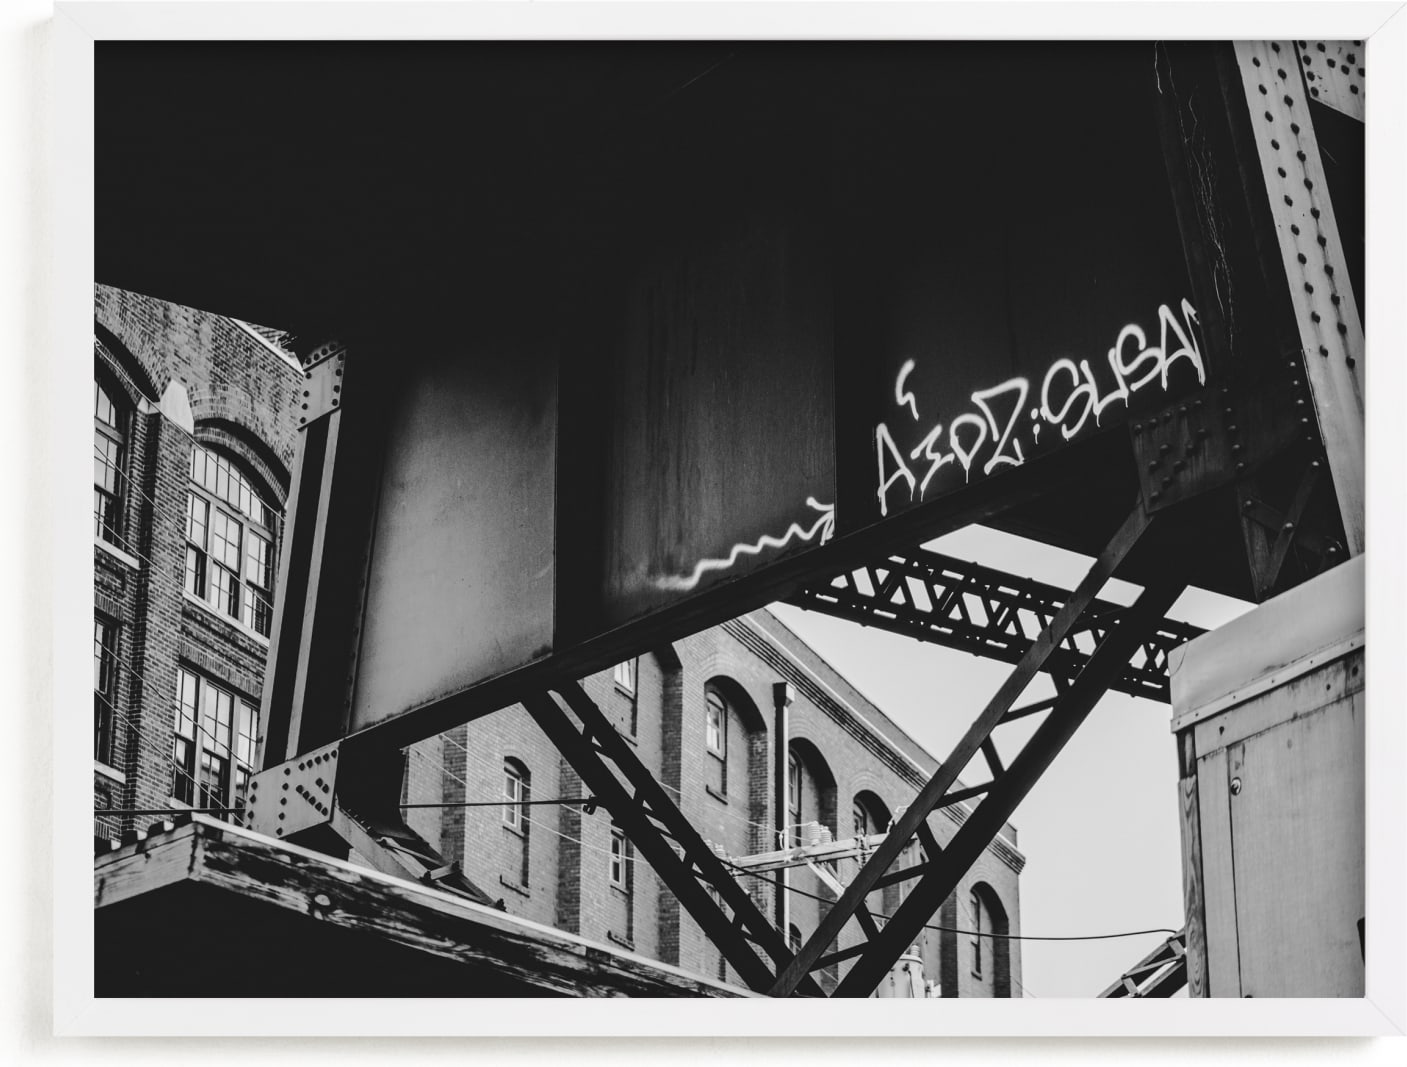 This is a black and white art by Curtis Newkirk called Shockoe Crossing.